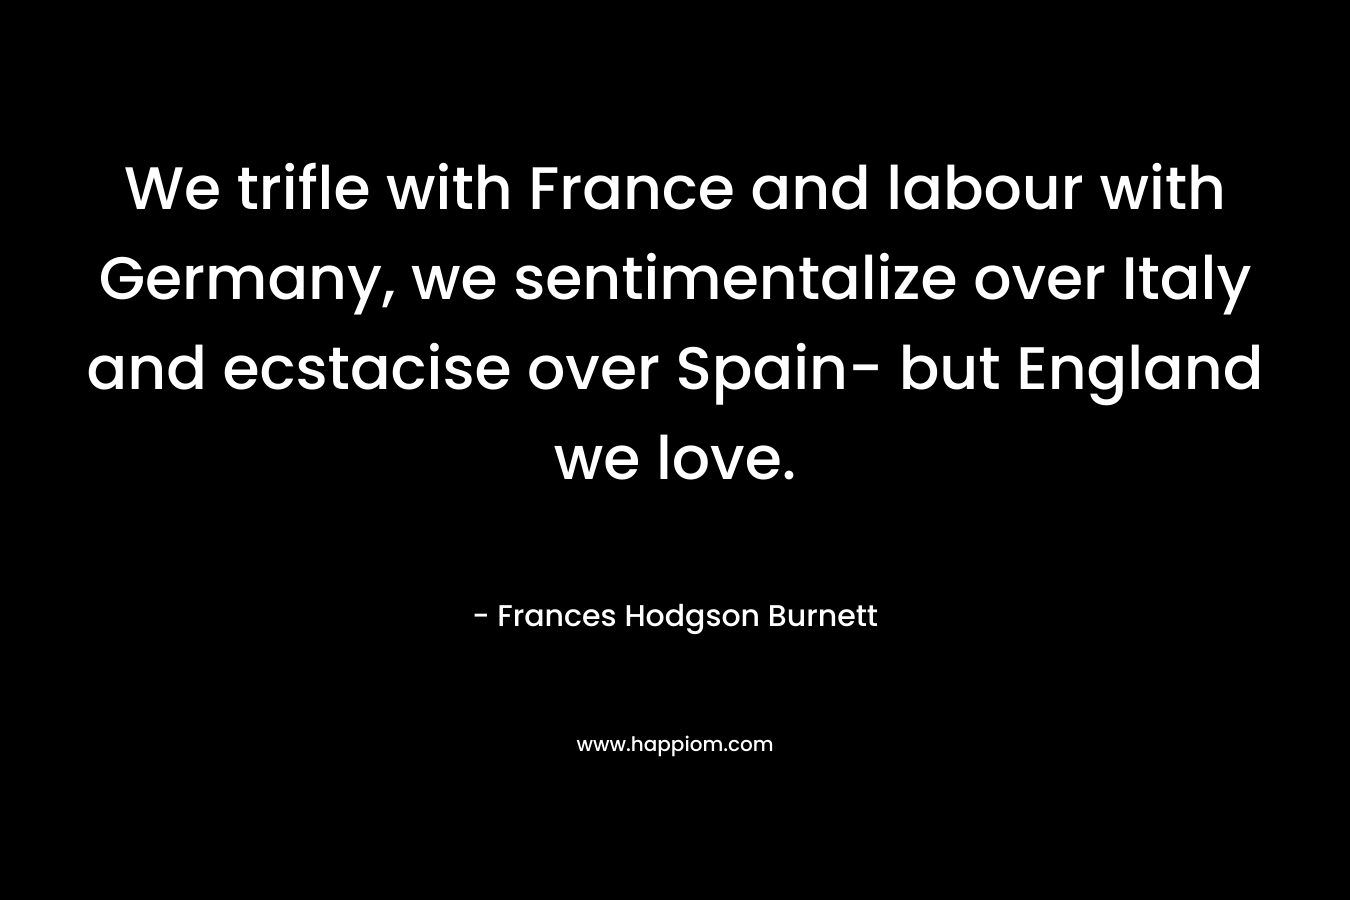 We trifle with France and labour with Germany, we sentimentalize over Italy and ecstacise over Spain- but England we love.